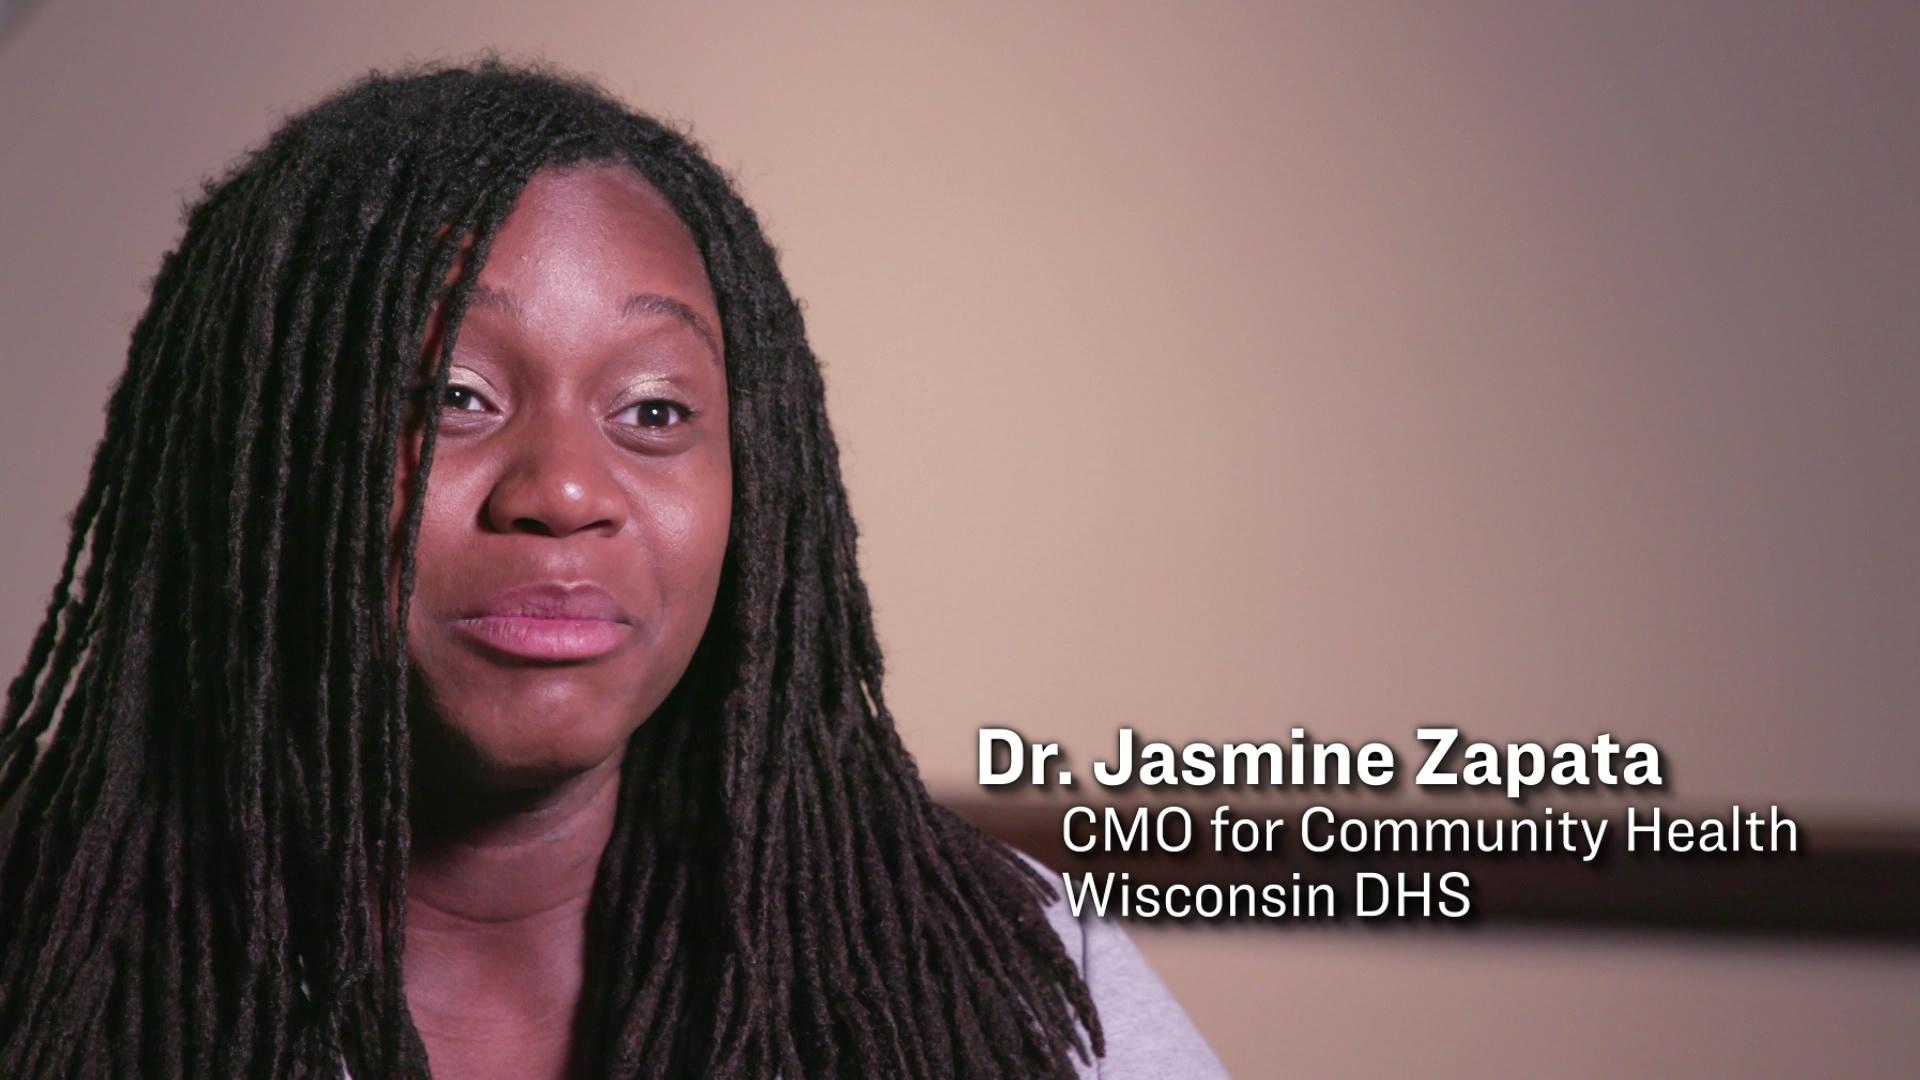 Dr. Jasmine Zapata on the impacts of having a preterm birth